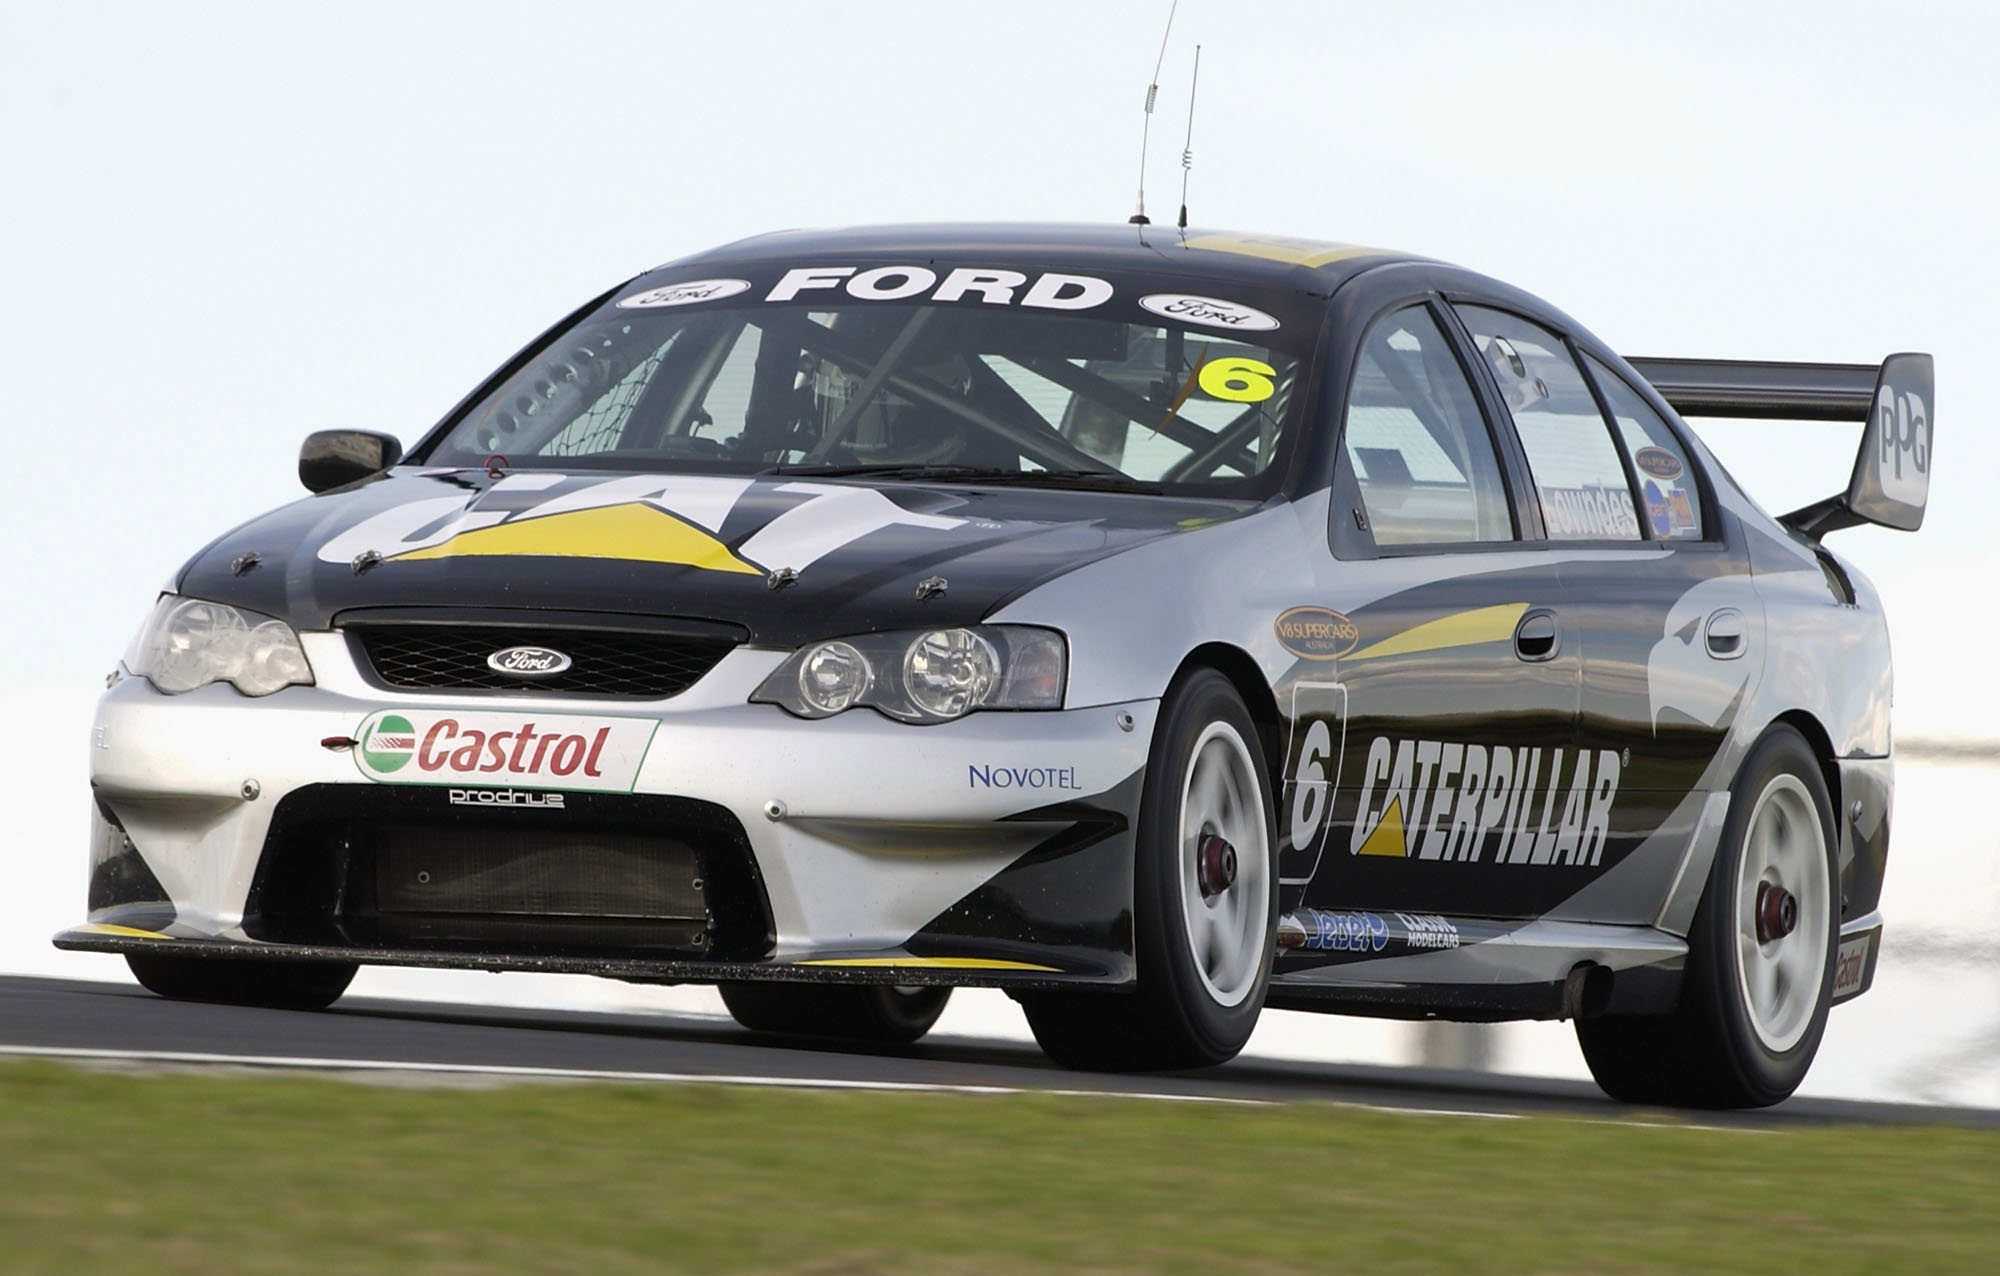 The Ford Falcon that Craig Lowndes raced in the 2003 V8 Supercars season has come out of hibernation.